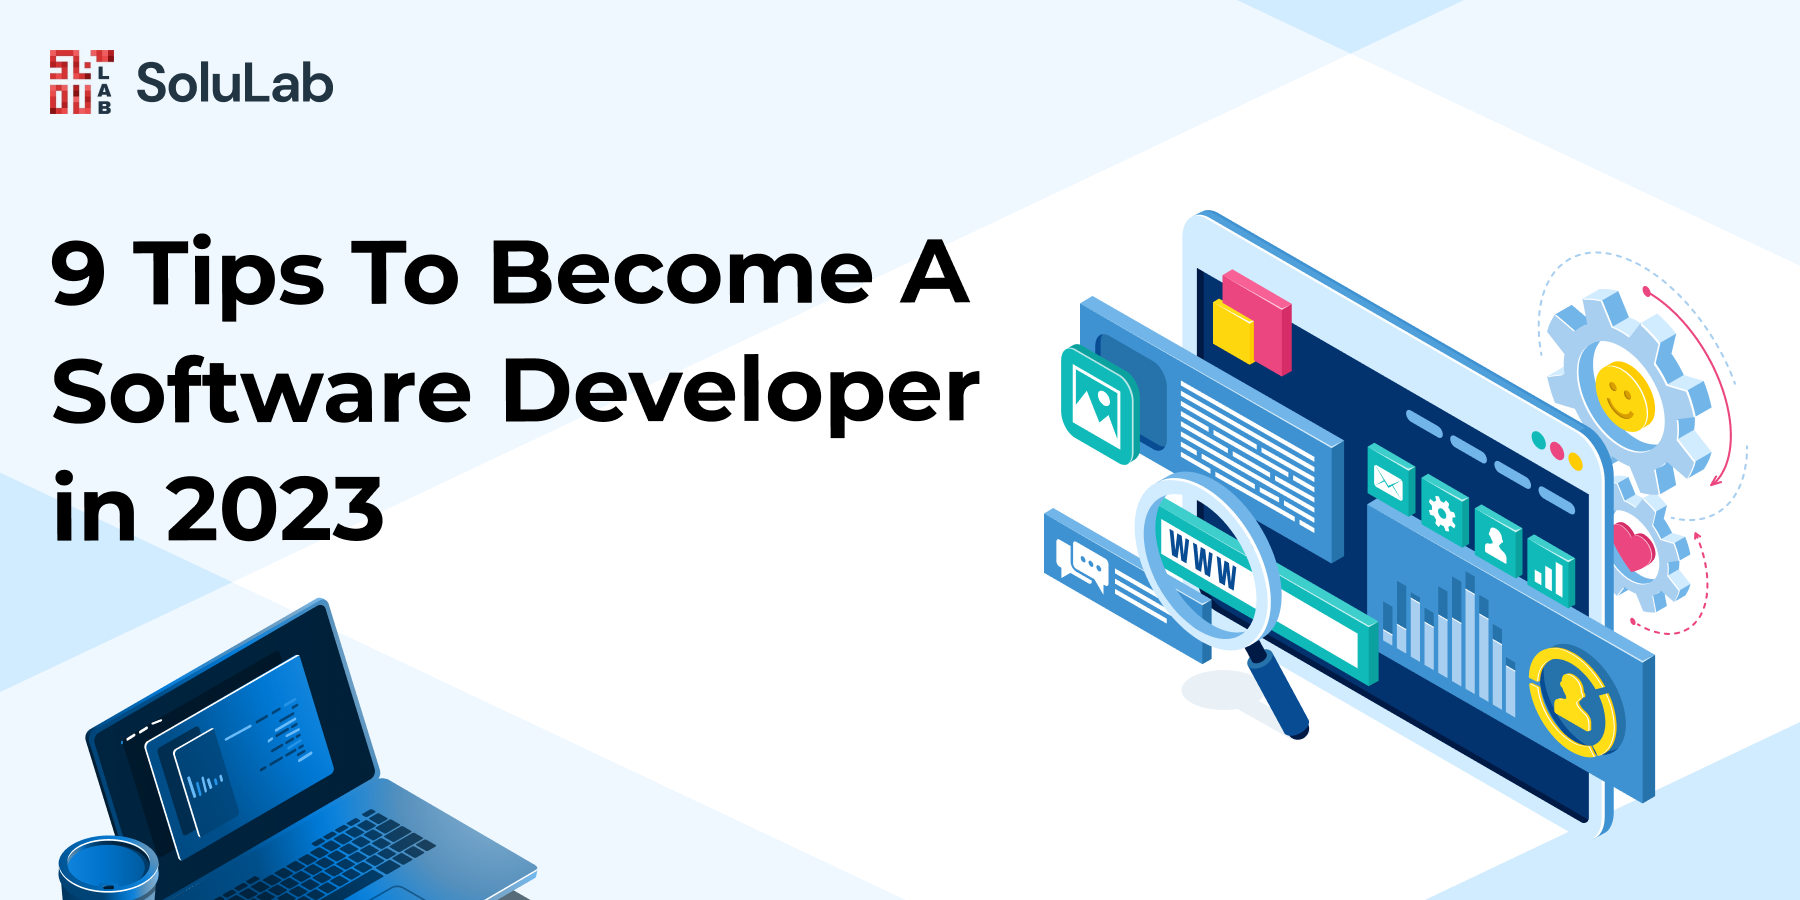 9 Tips To Become A Software Developer in 2023